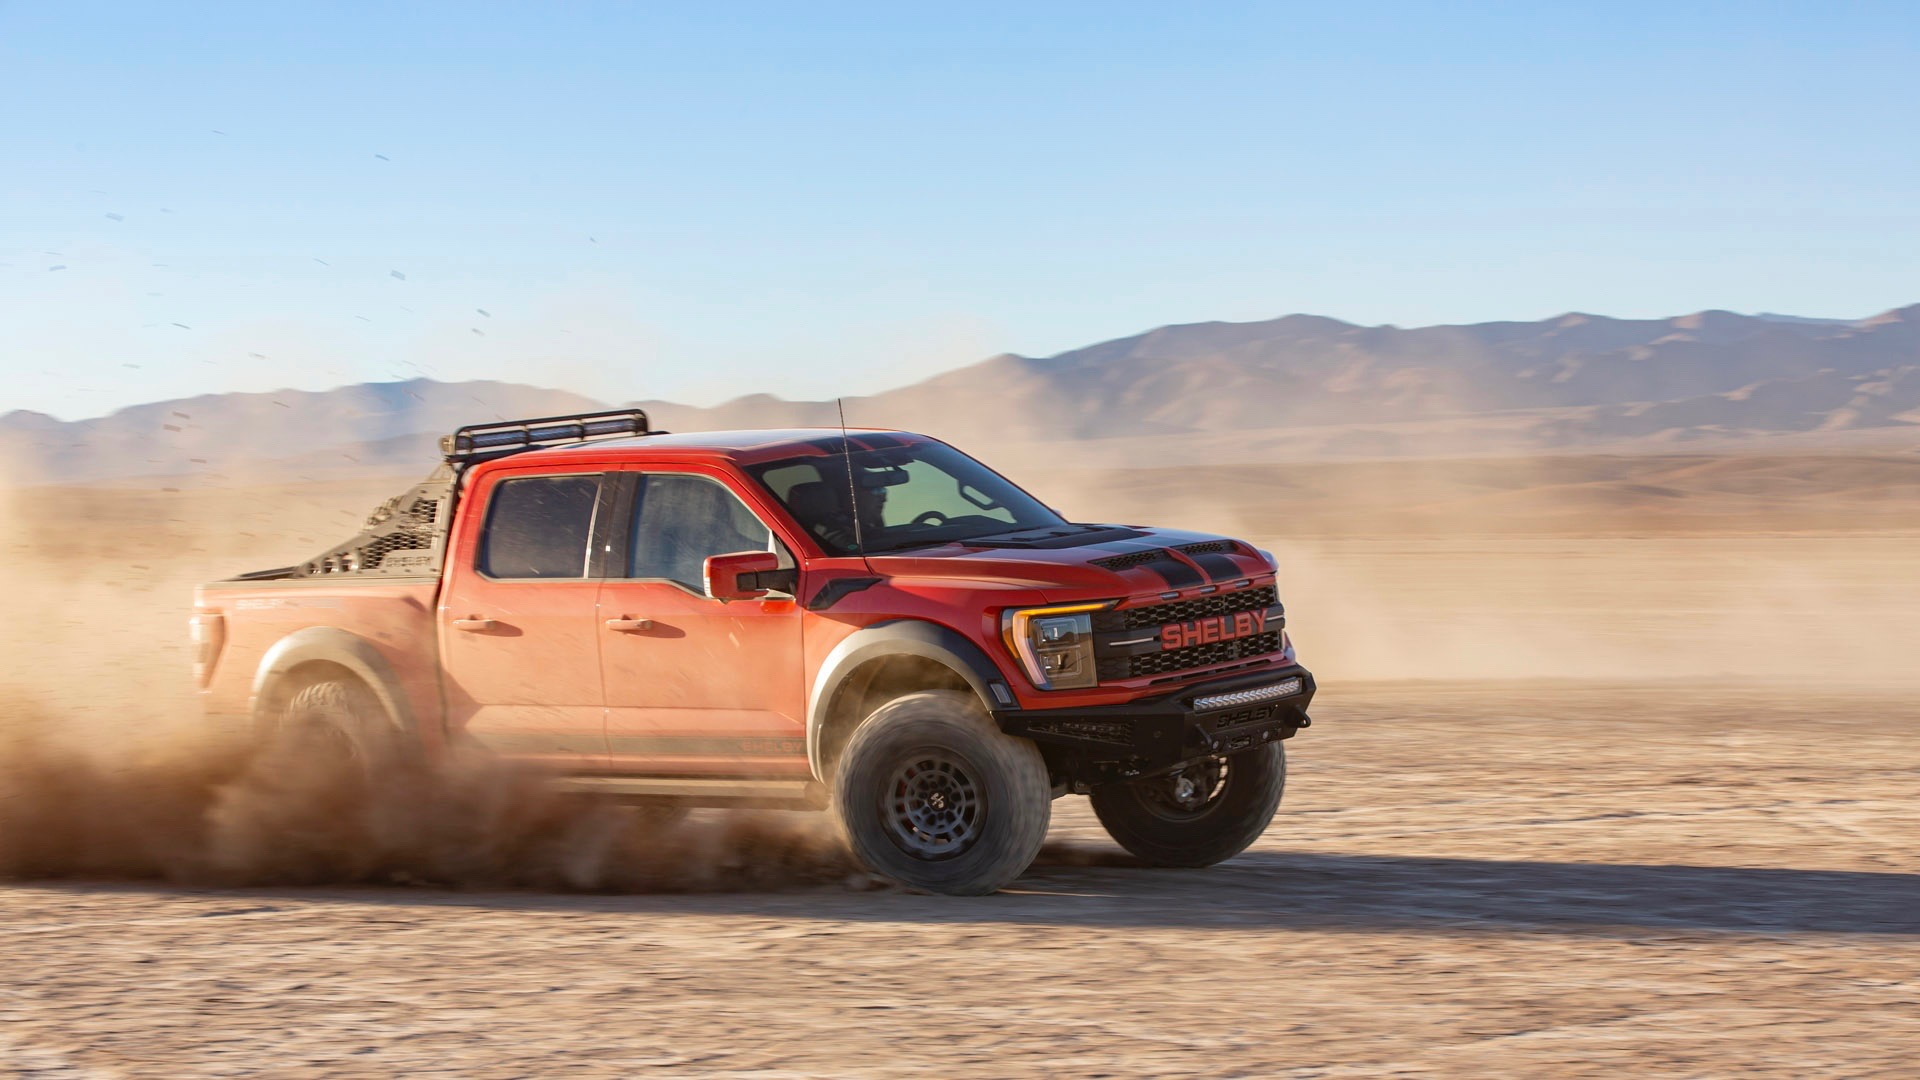 2022 Ford Shelby Raptor